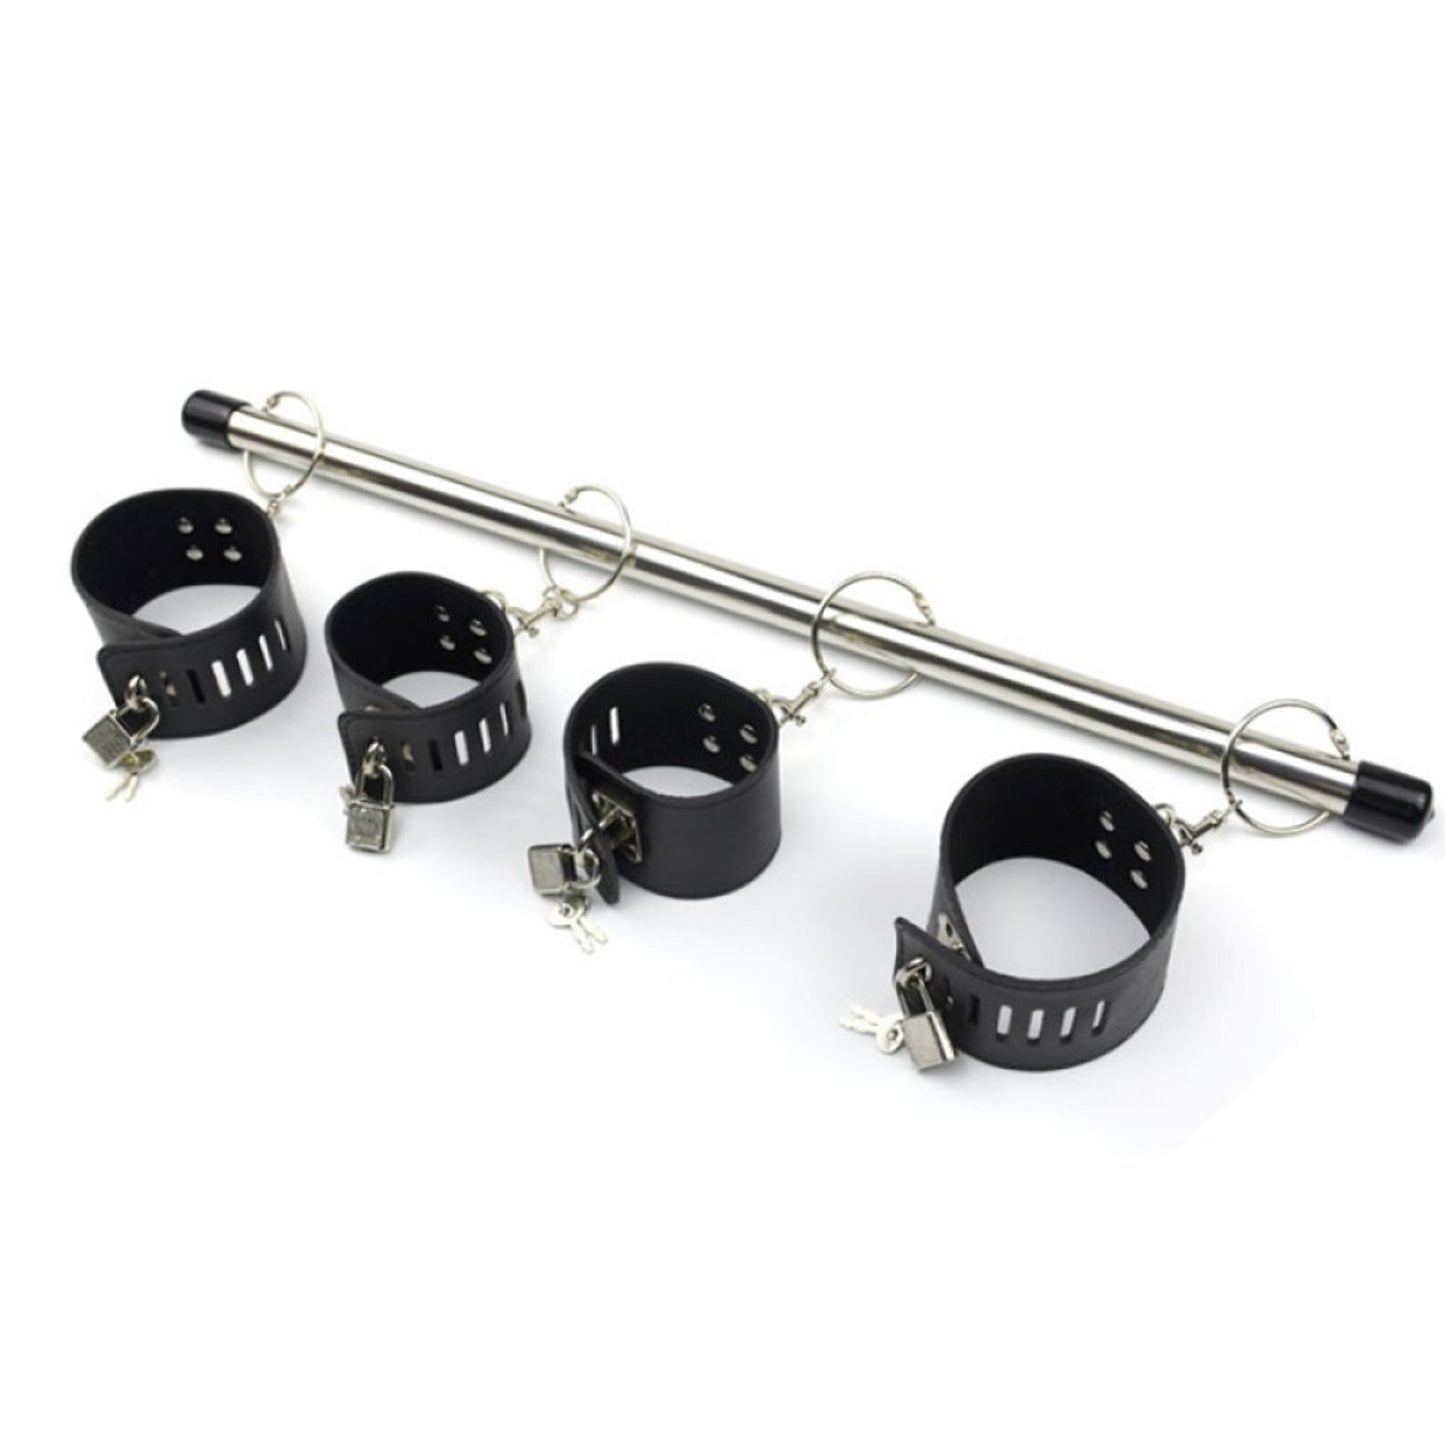 Luxury Restraint Bondage Set With Bar, Ankle Cuffs and Handcuffs